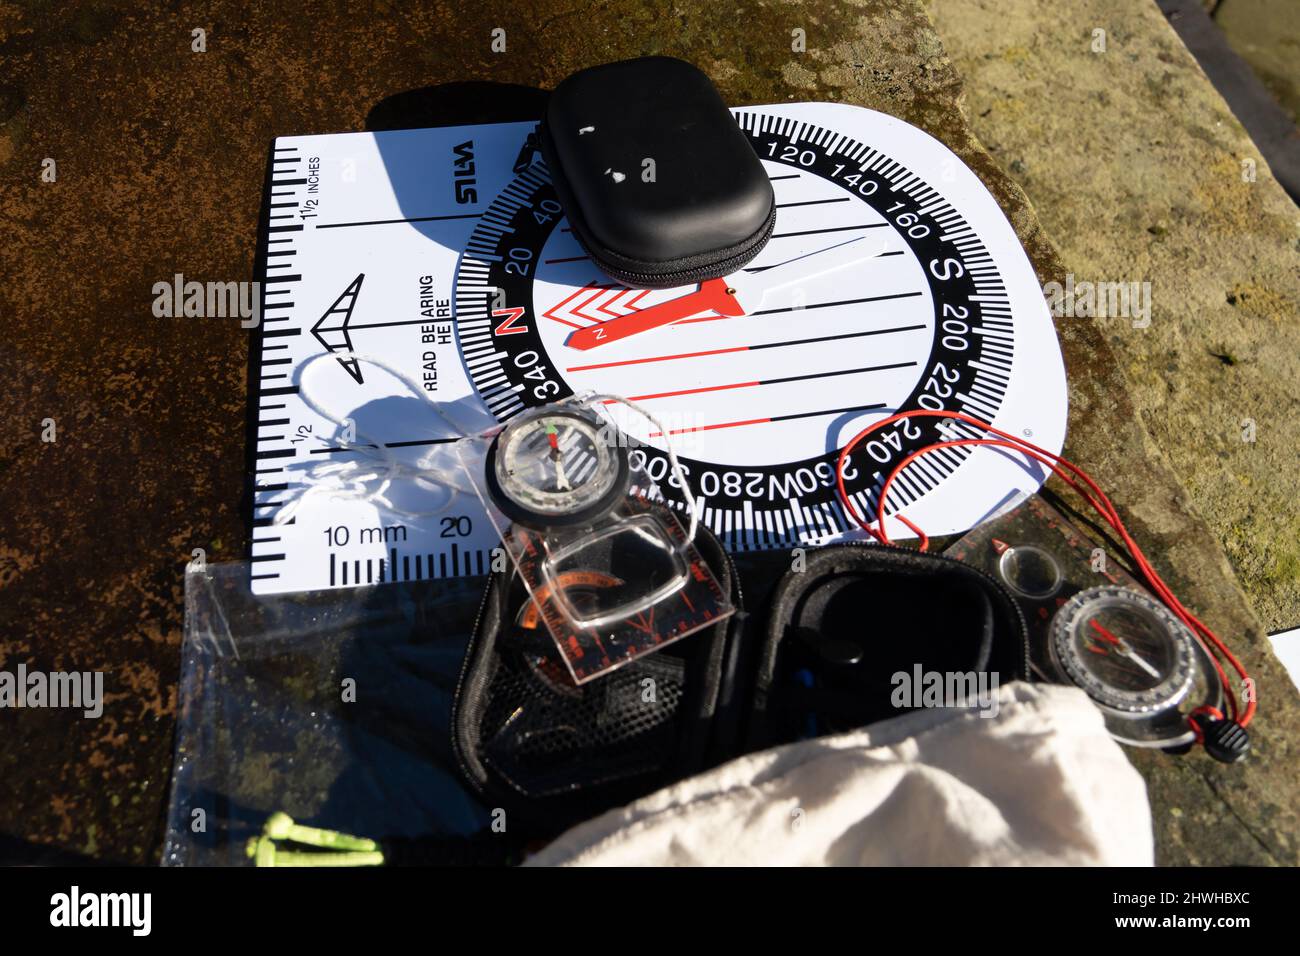 Orienteering training equipment on an outdoor table. Stock Photo